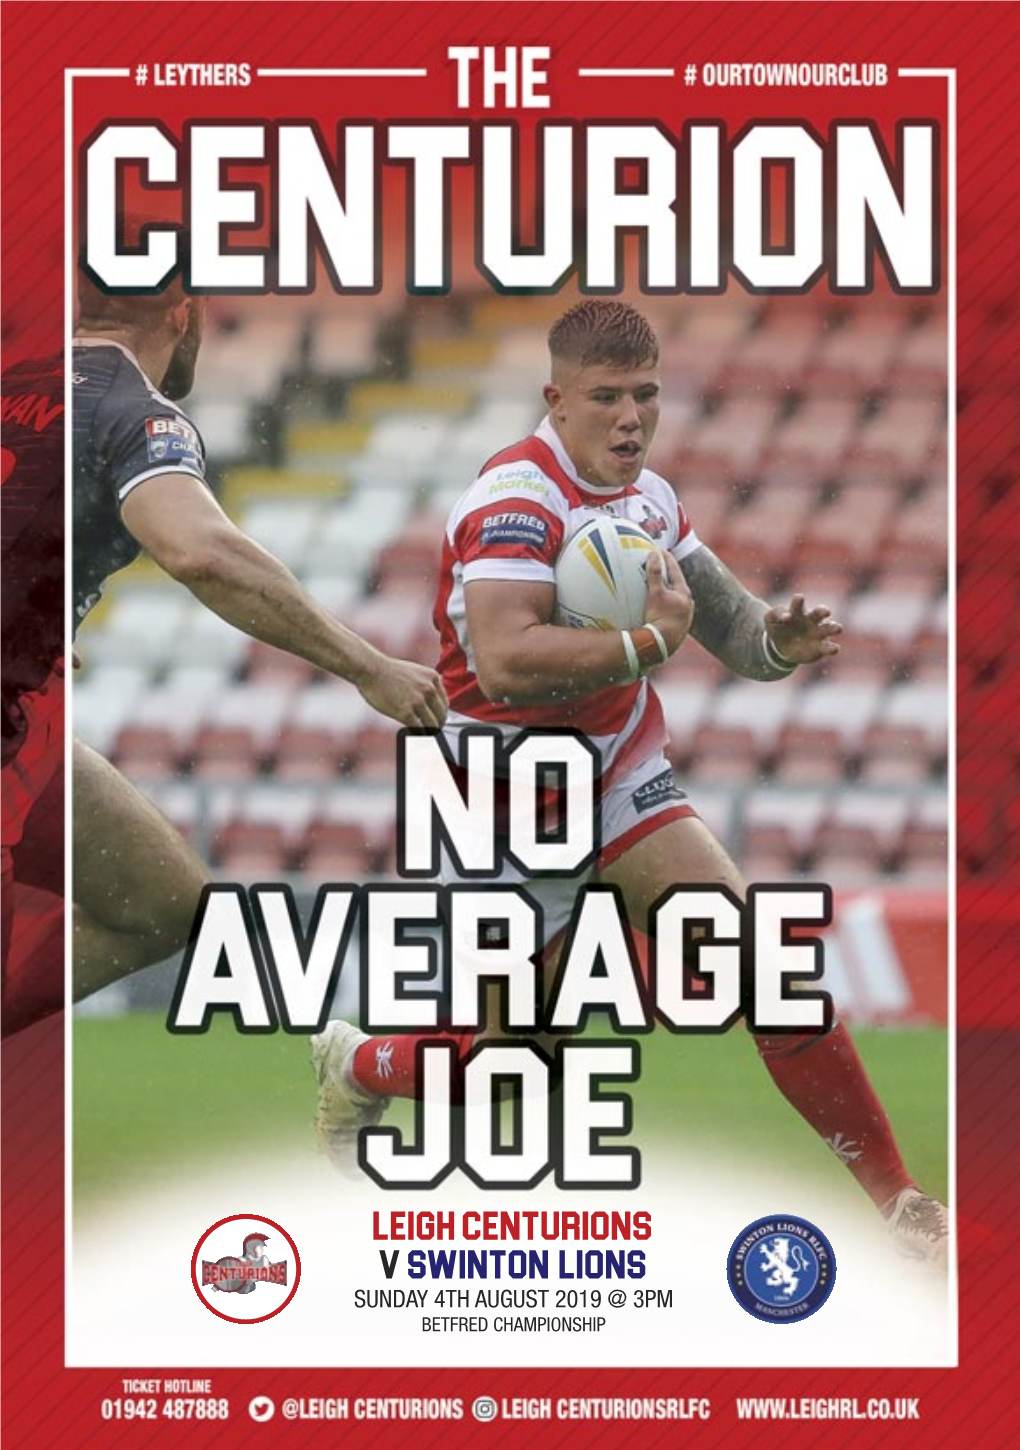 Leigh Centurions V SWINTON LIONS SUNDAY 4TH AUGUST 2019 @ 3PM BETFRED CHAMPIONSHIP FROM# LEYTHERS the TOP...# OURTOWNOURCLUB